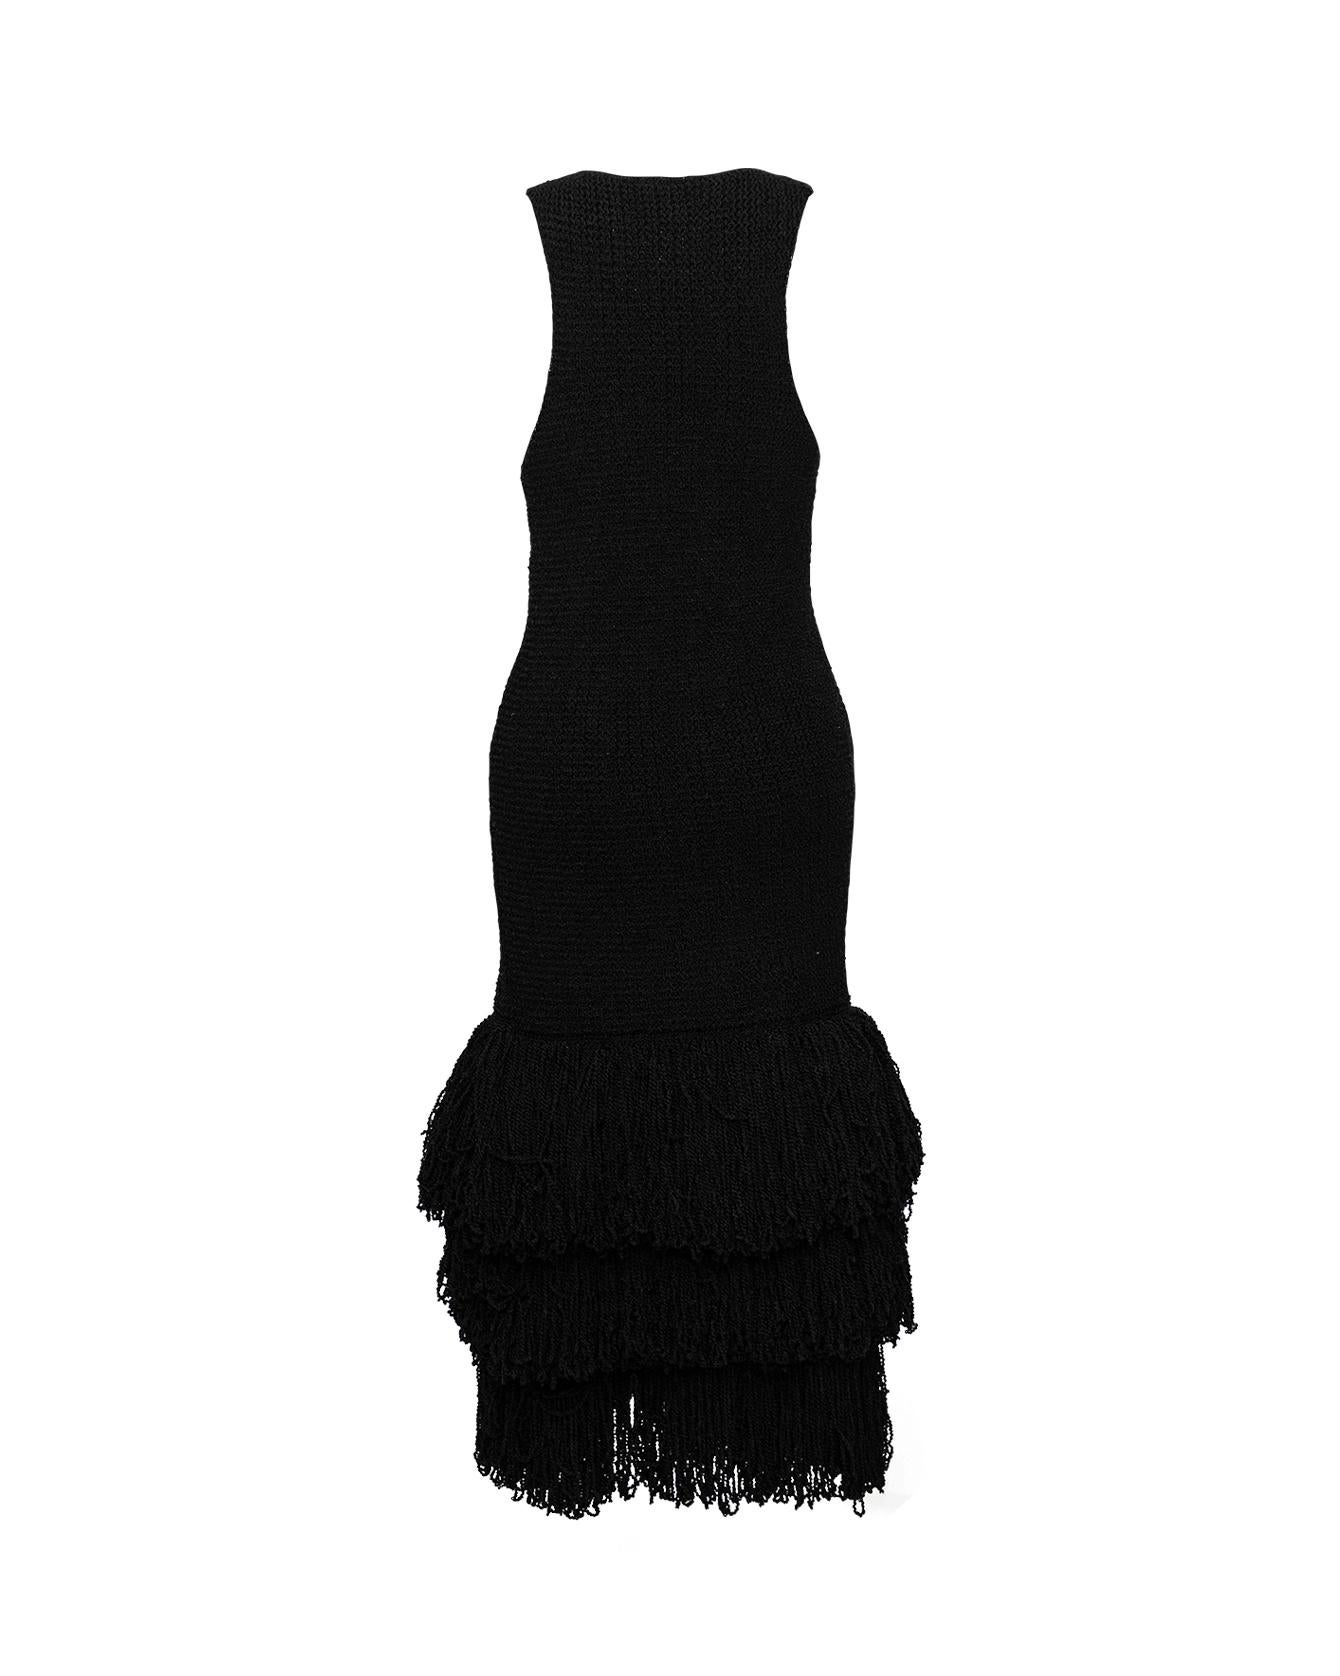 S/S 2015 Céline by Phoebe Philo Black Textured Silk Midi Dress with Fringe In Good Condition In North Hollywood, CA